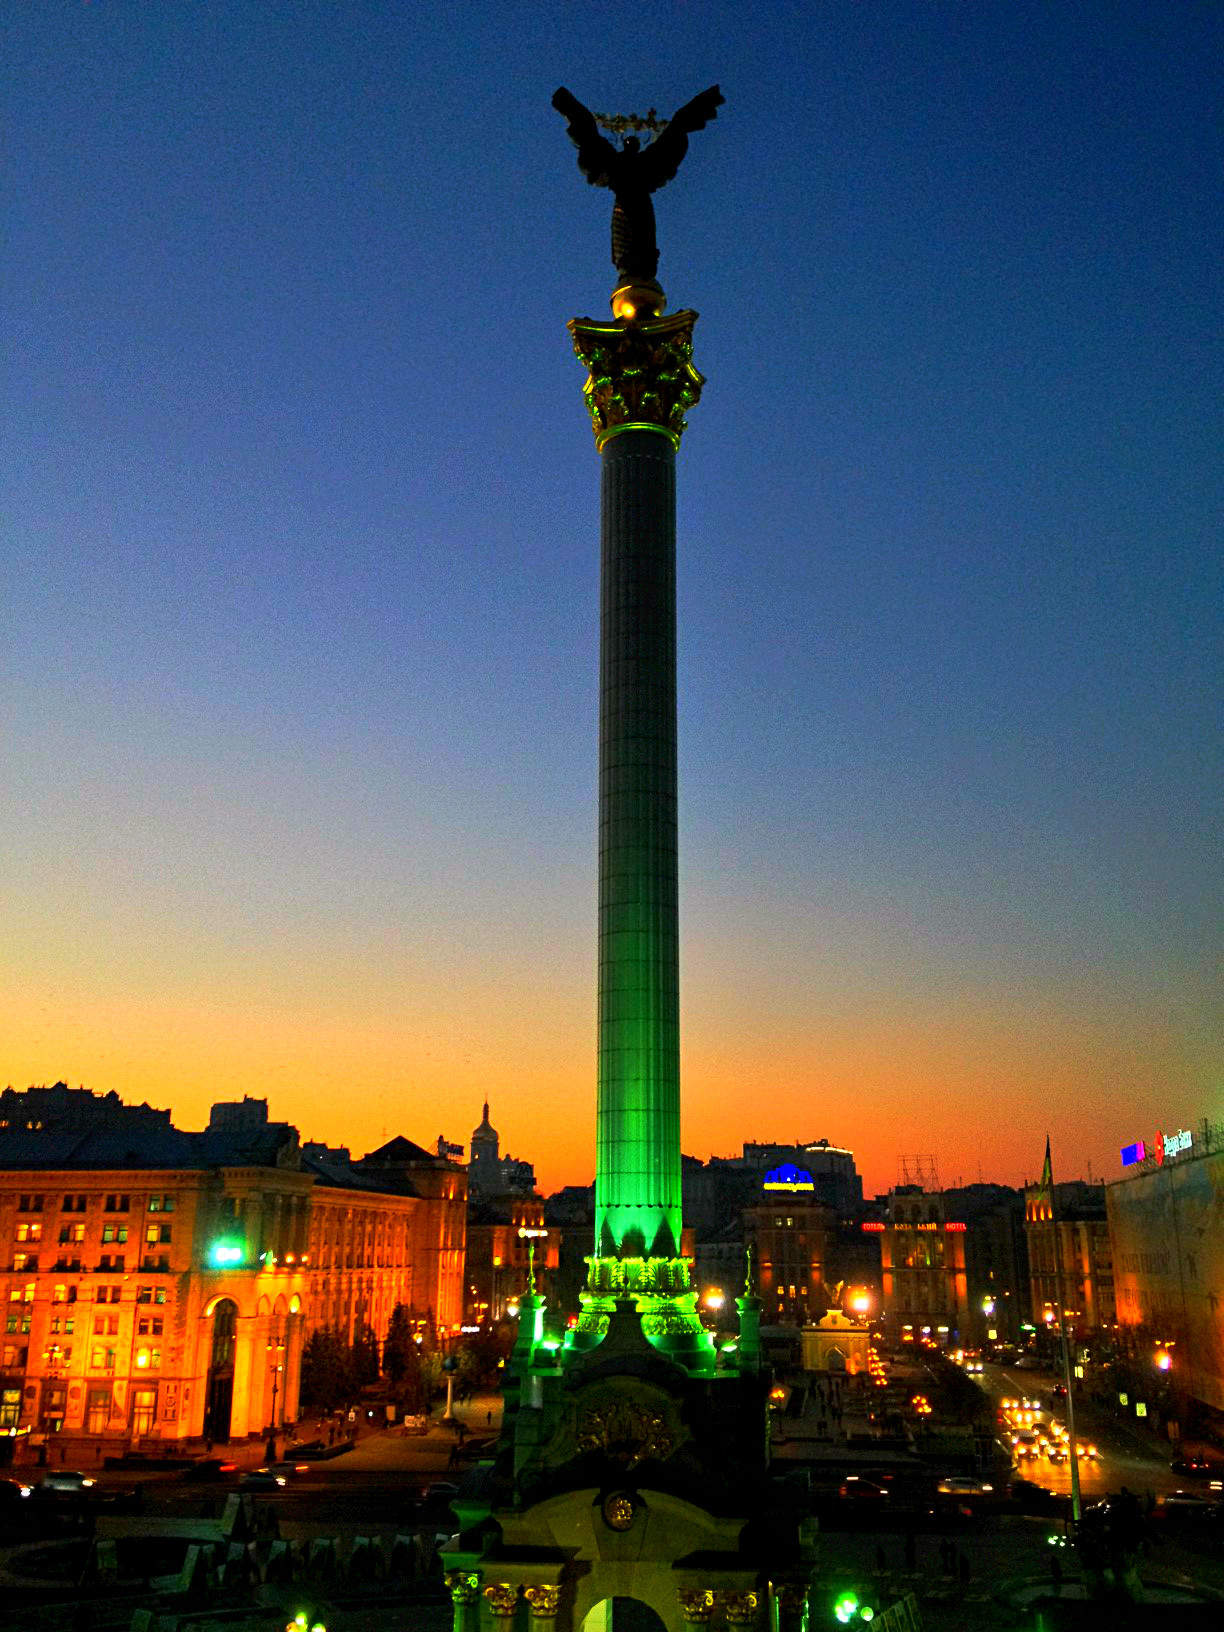 Centre of Maidan Square - Independency Column topped with a statue of Archangel Mikhail